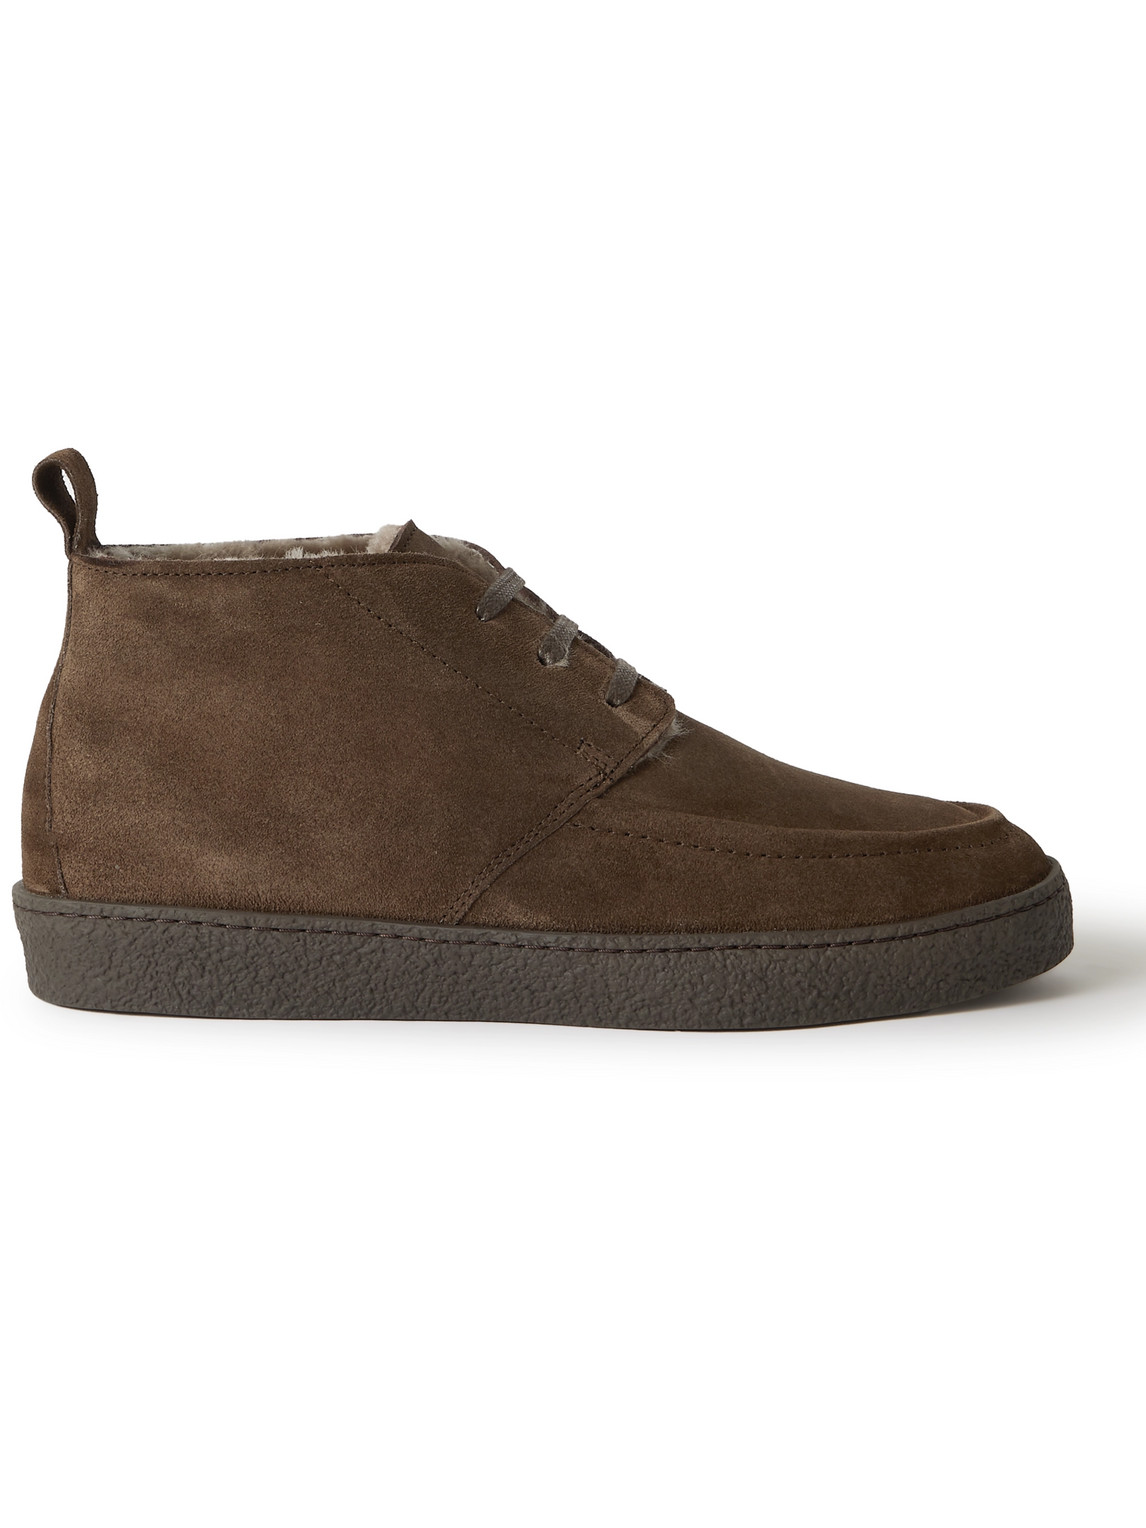 Larry Shearling-Trimmed Regenerated Suede by evolo® Chukka Boots